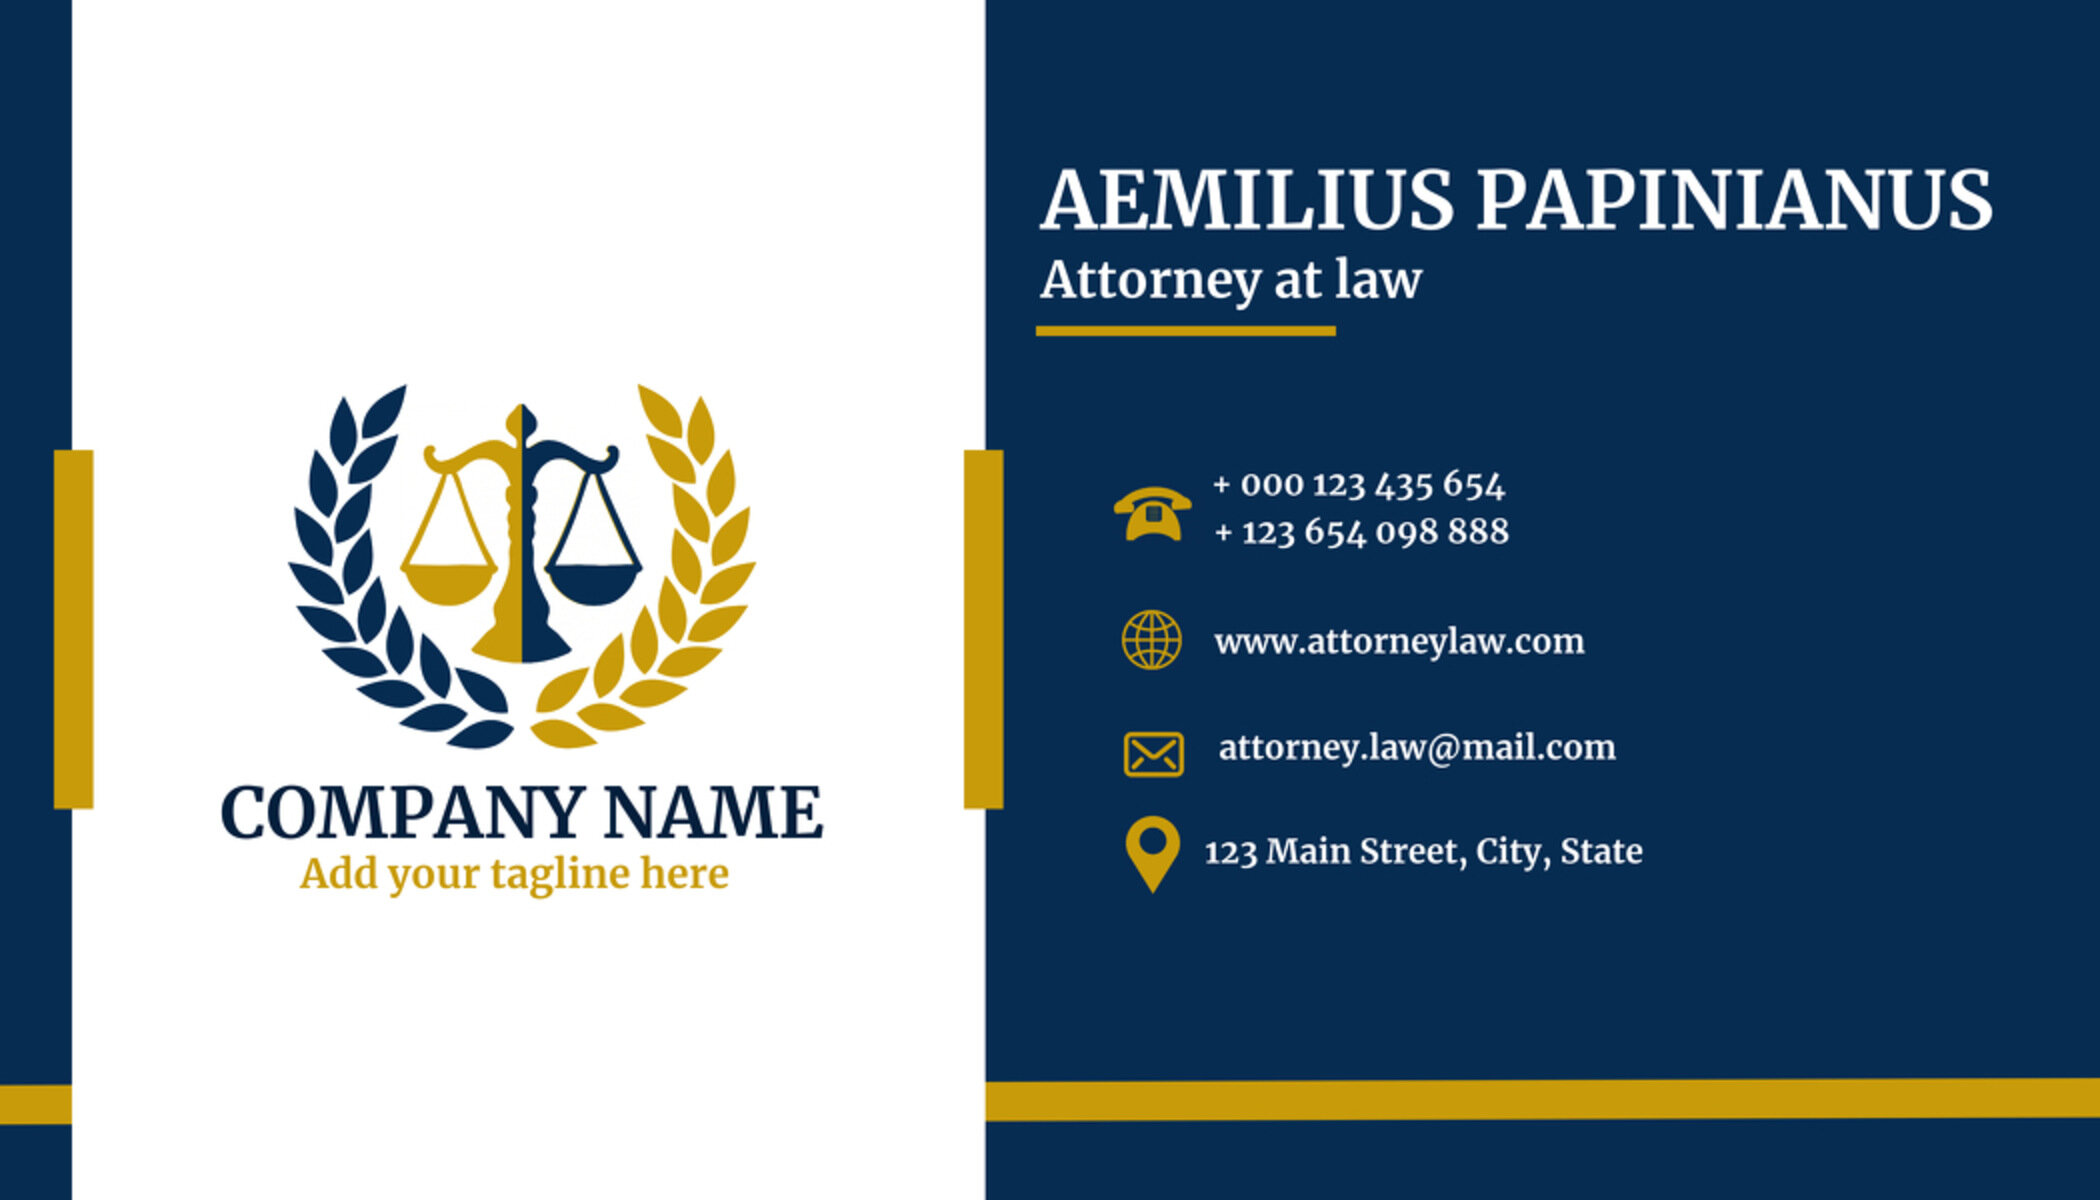 Copy of Law attorney business card.jpg